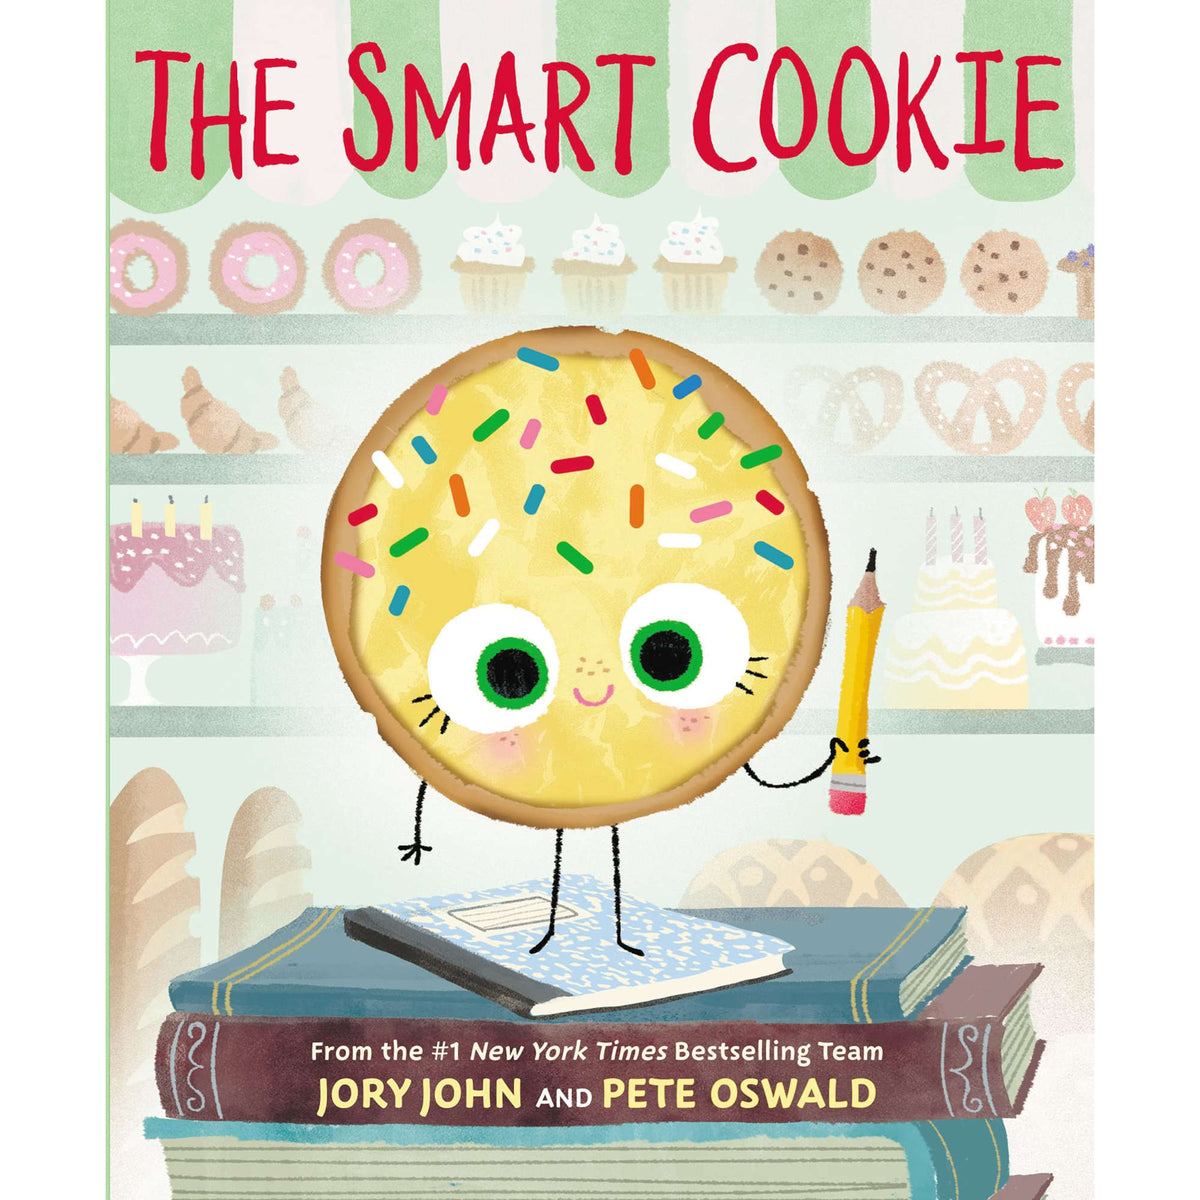 The Smart Cookie (The Food Group)